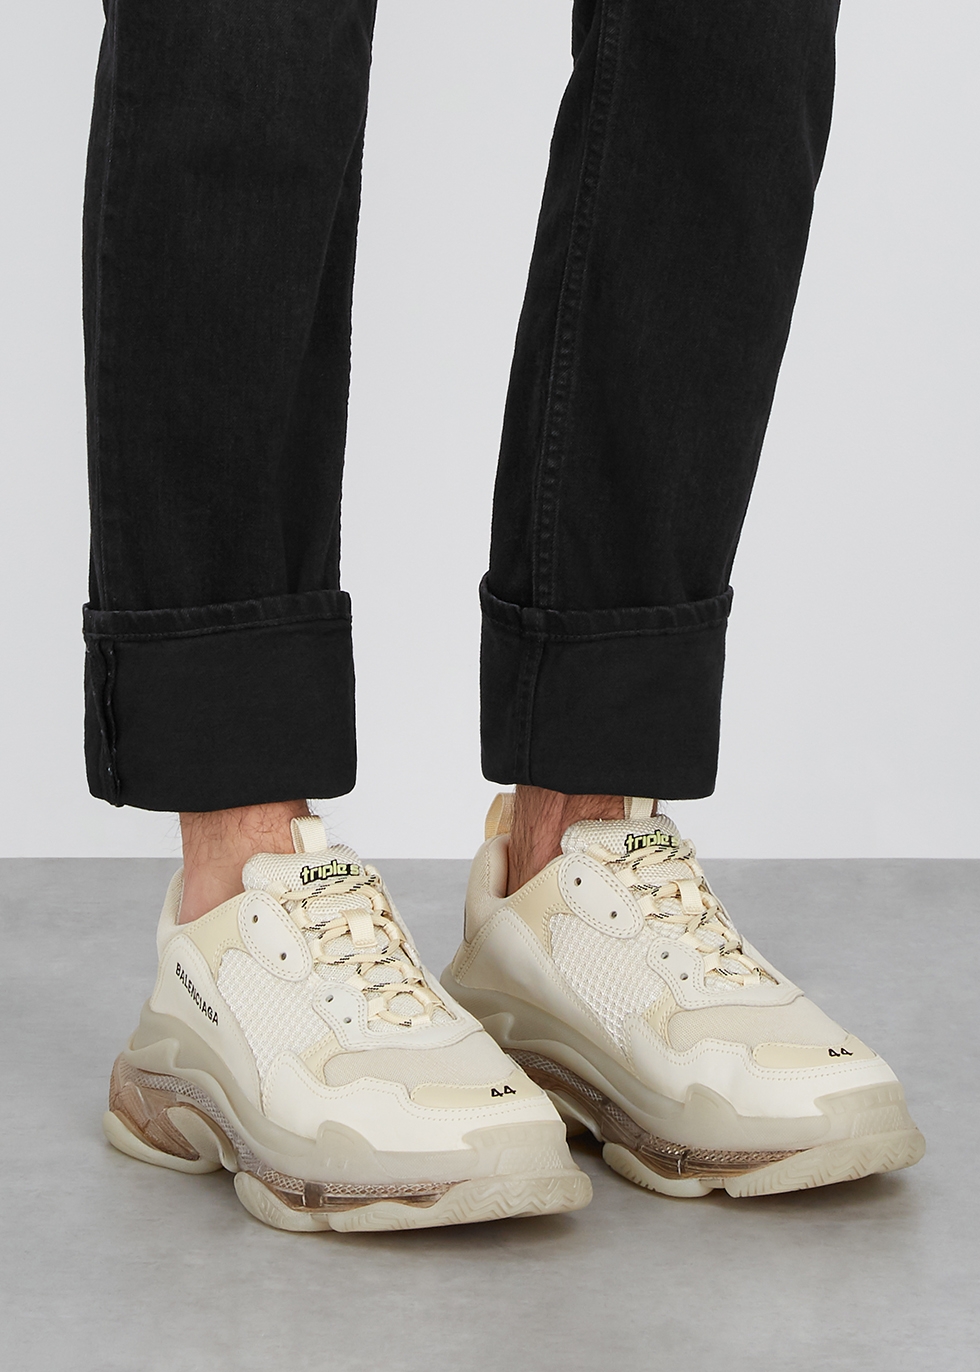 balenciaga All white Triple S sneakers available on